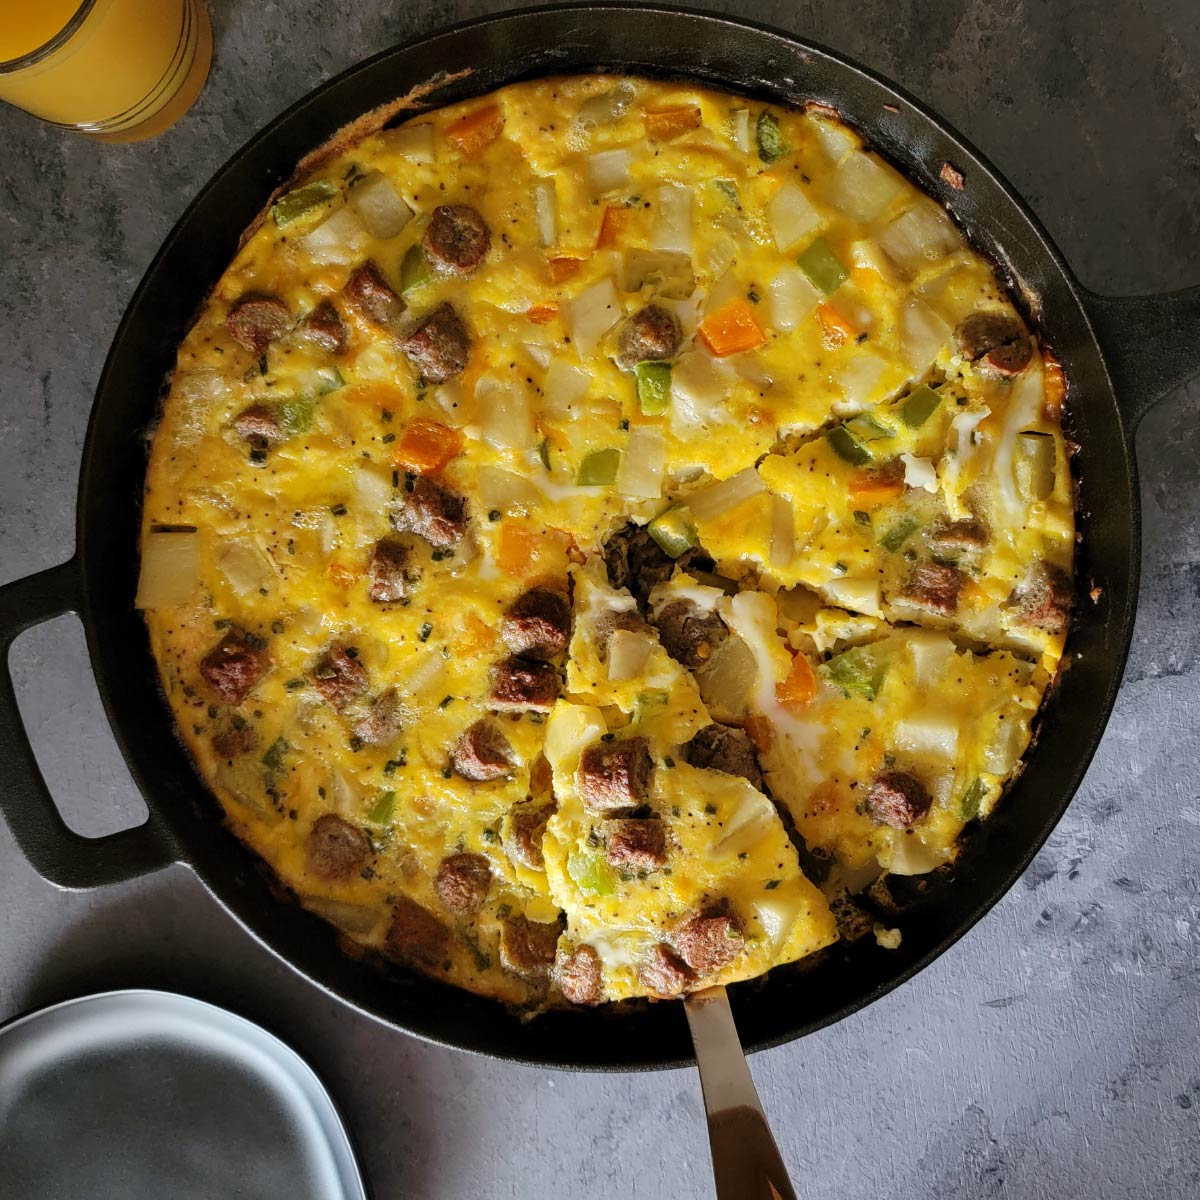 Breakfast casserole in the cast iron pan ready to be served